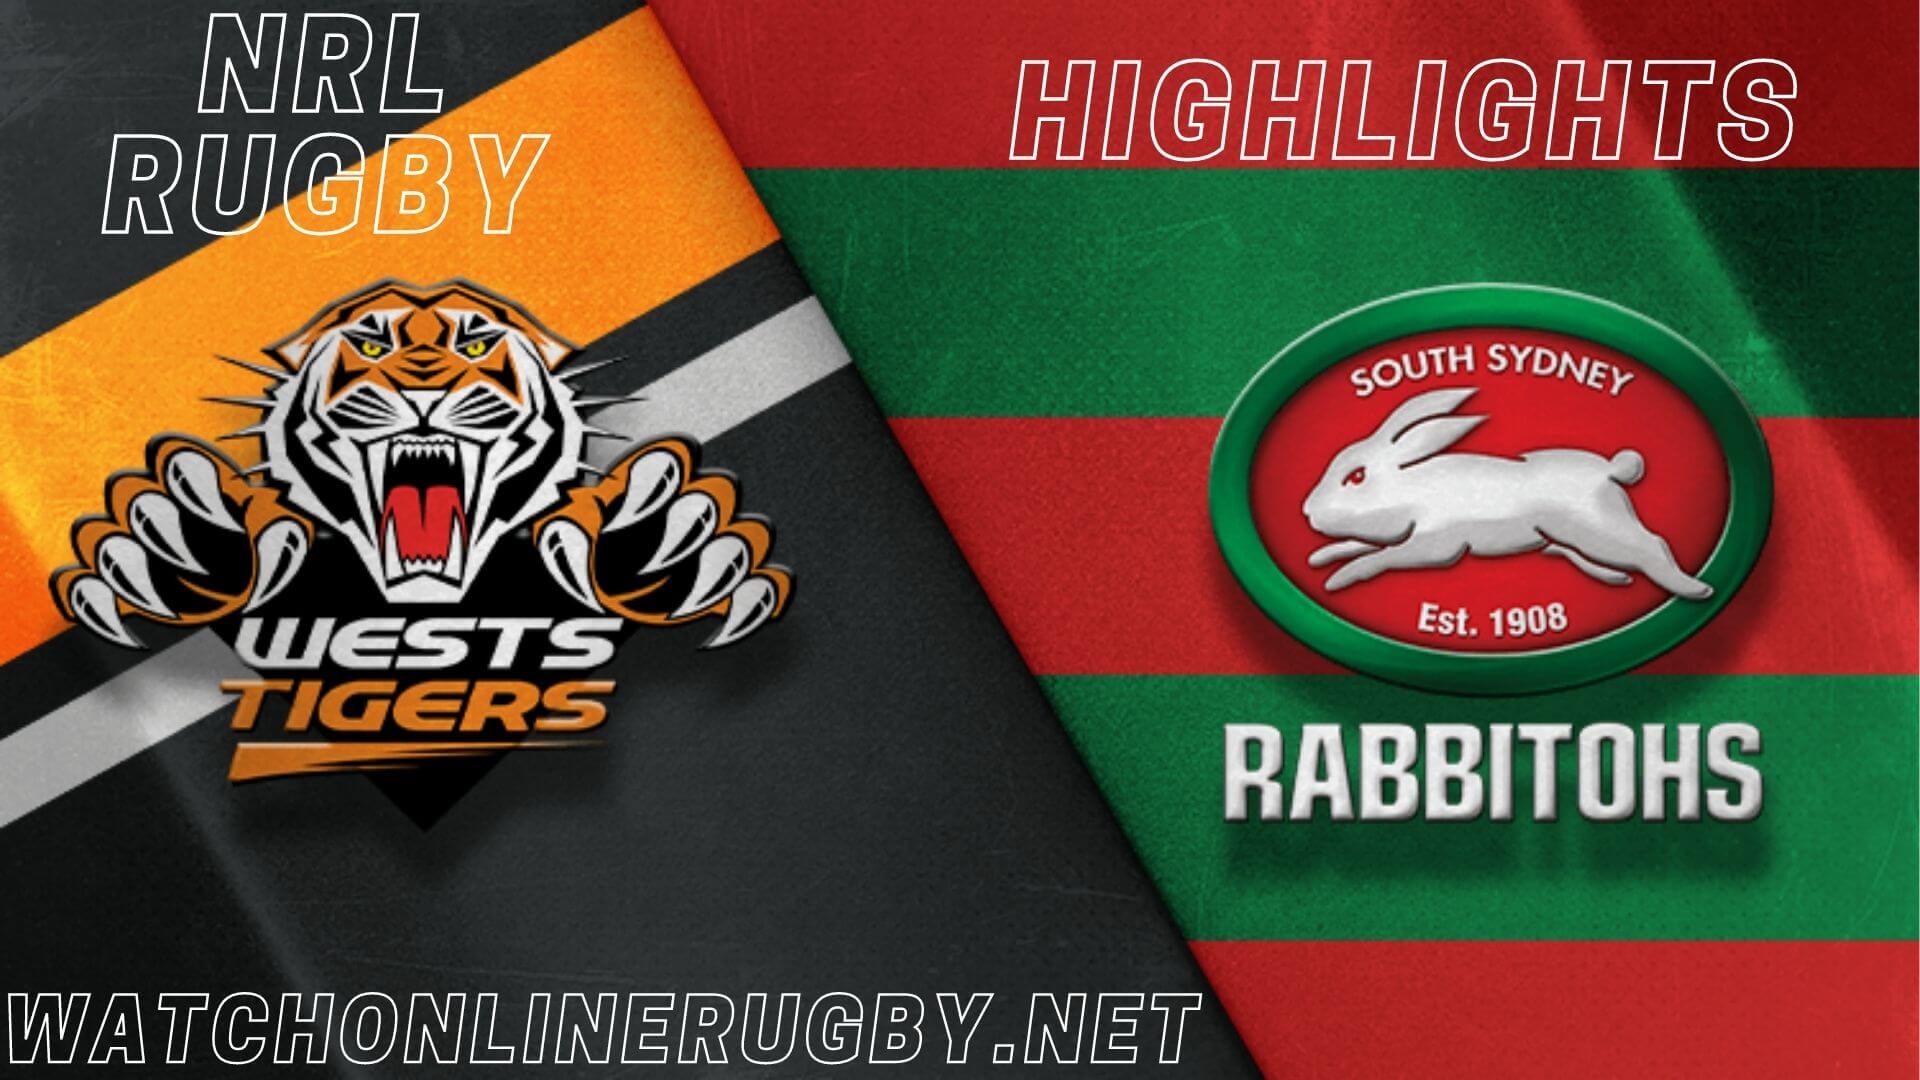 Rabbitohs Vs Wests Tigers Highlights RD 12 NRL Rugby